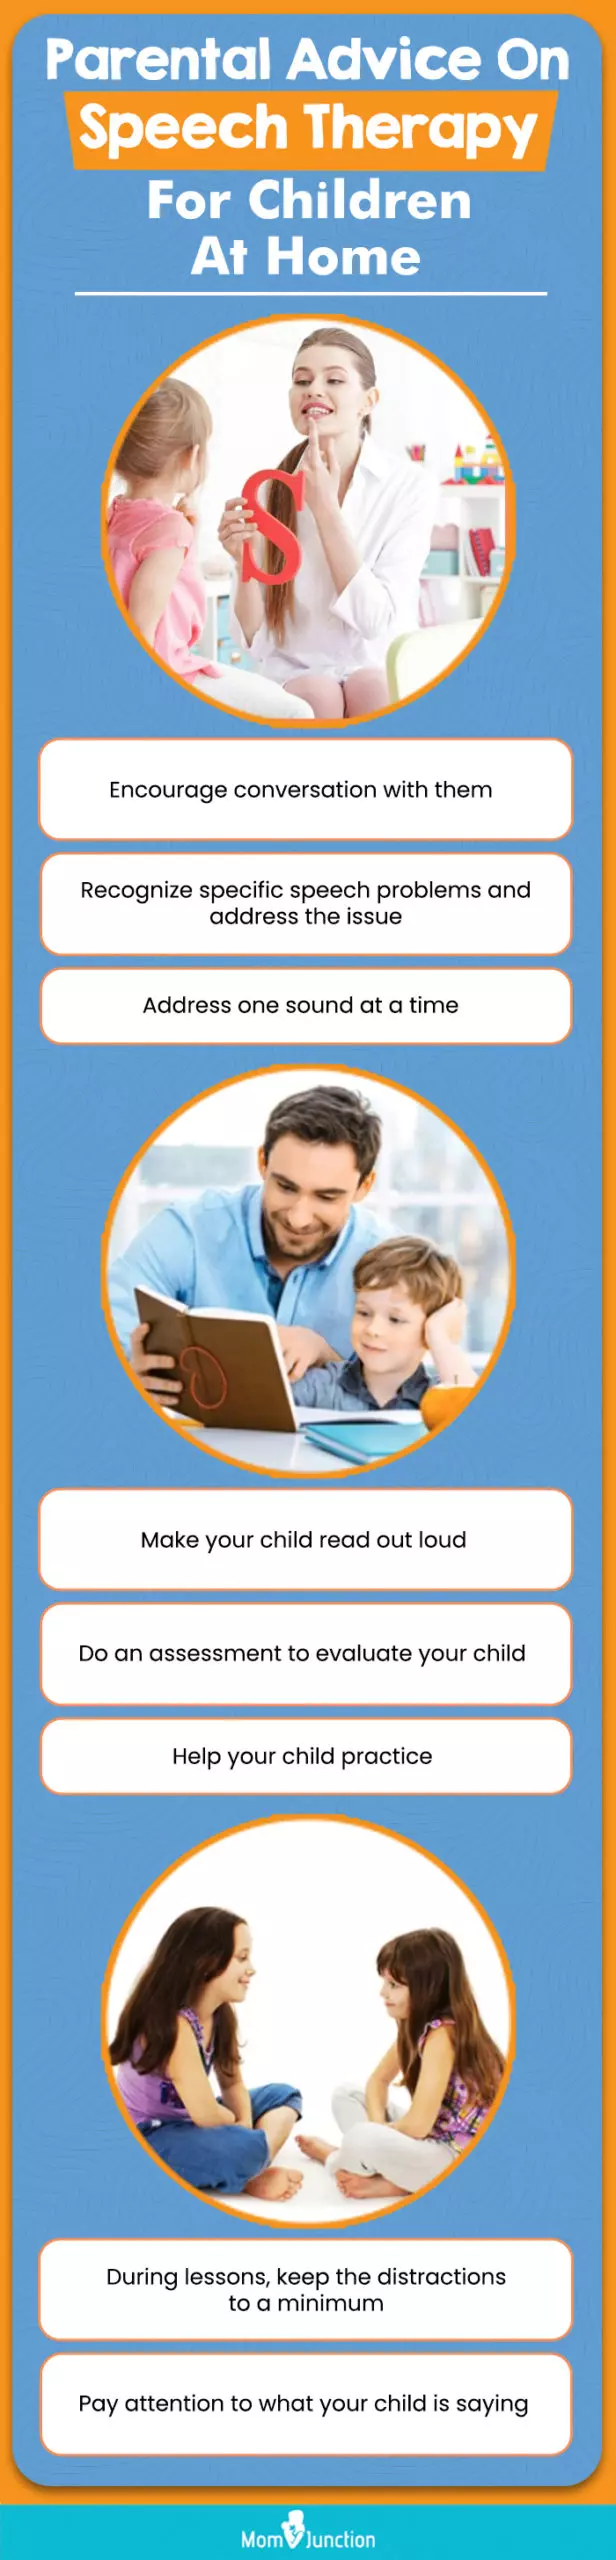 parental advice for speech therapy for children at home (infographic)